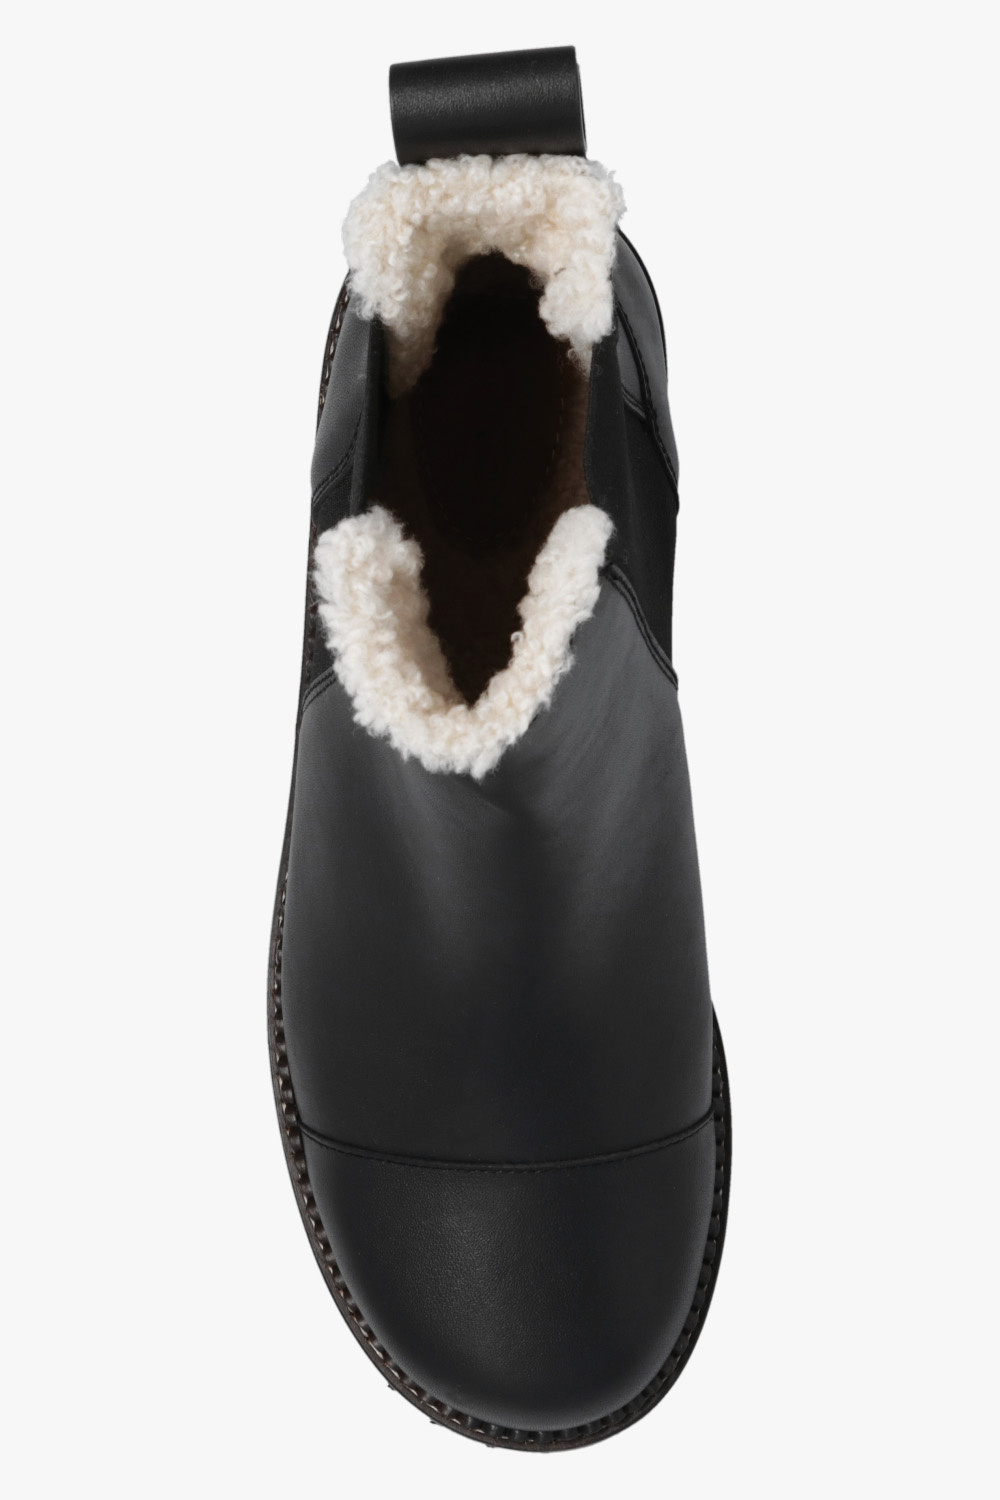 See By Chloé ‘Mallory’ heeled ankle boots